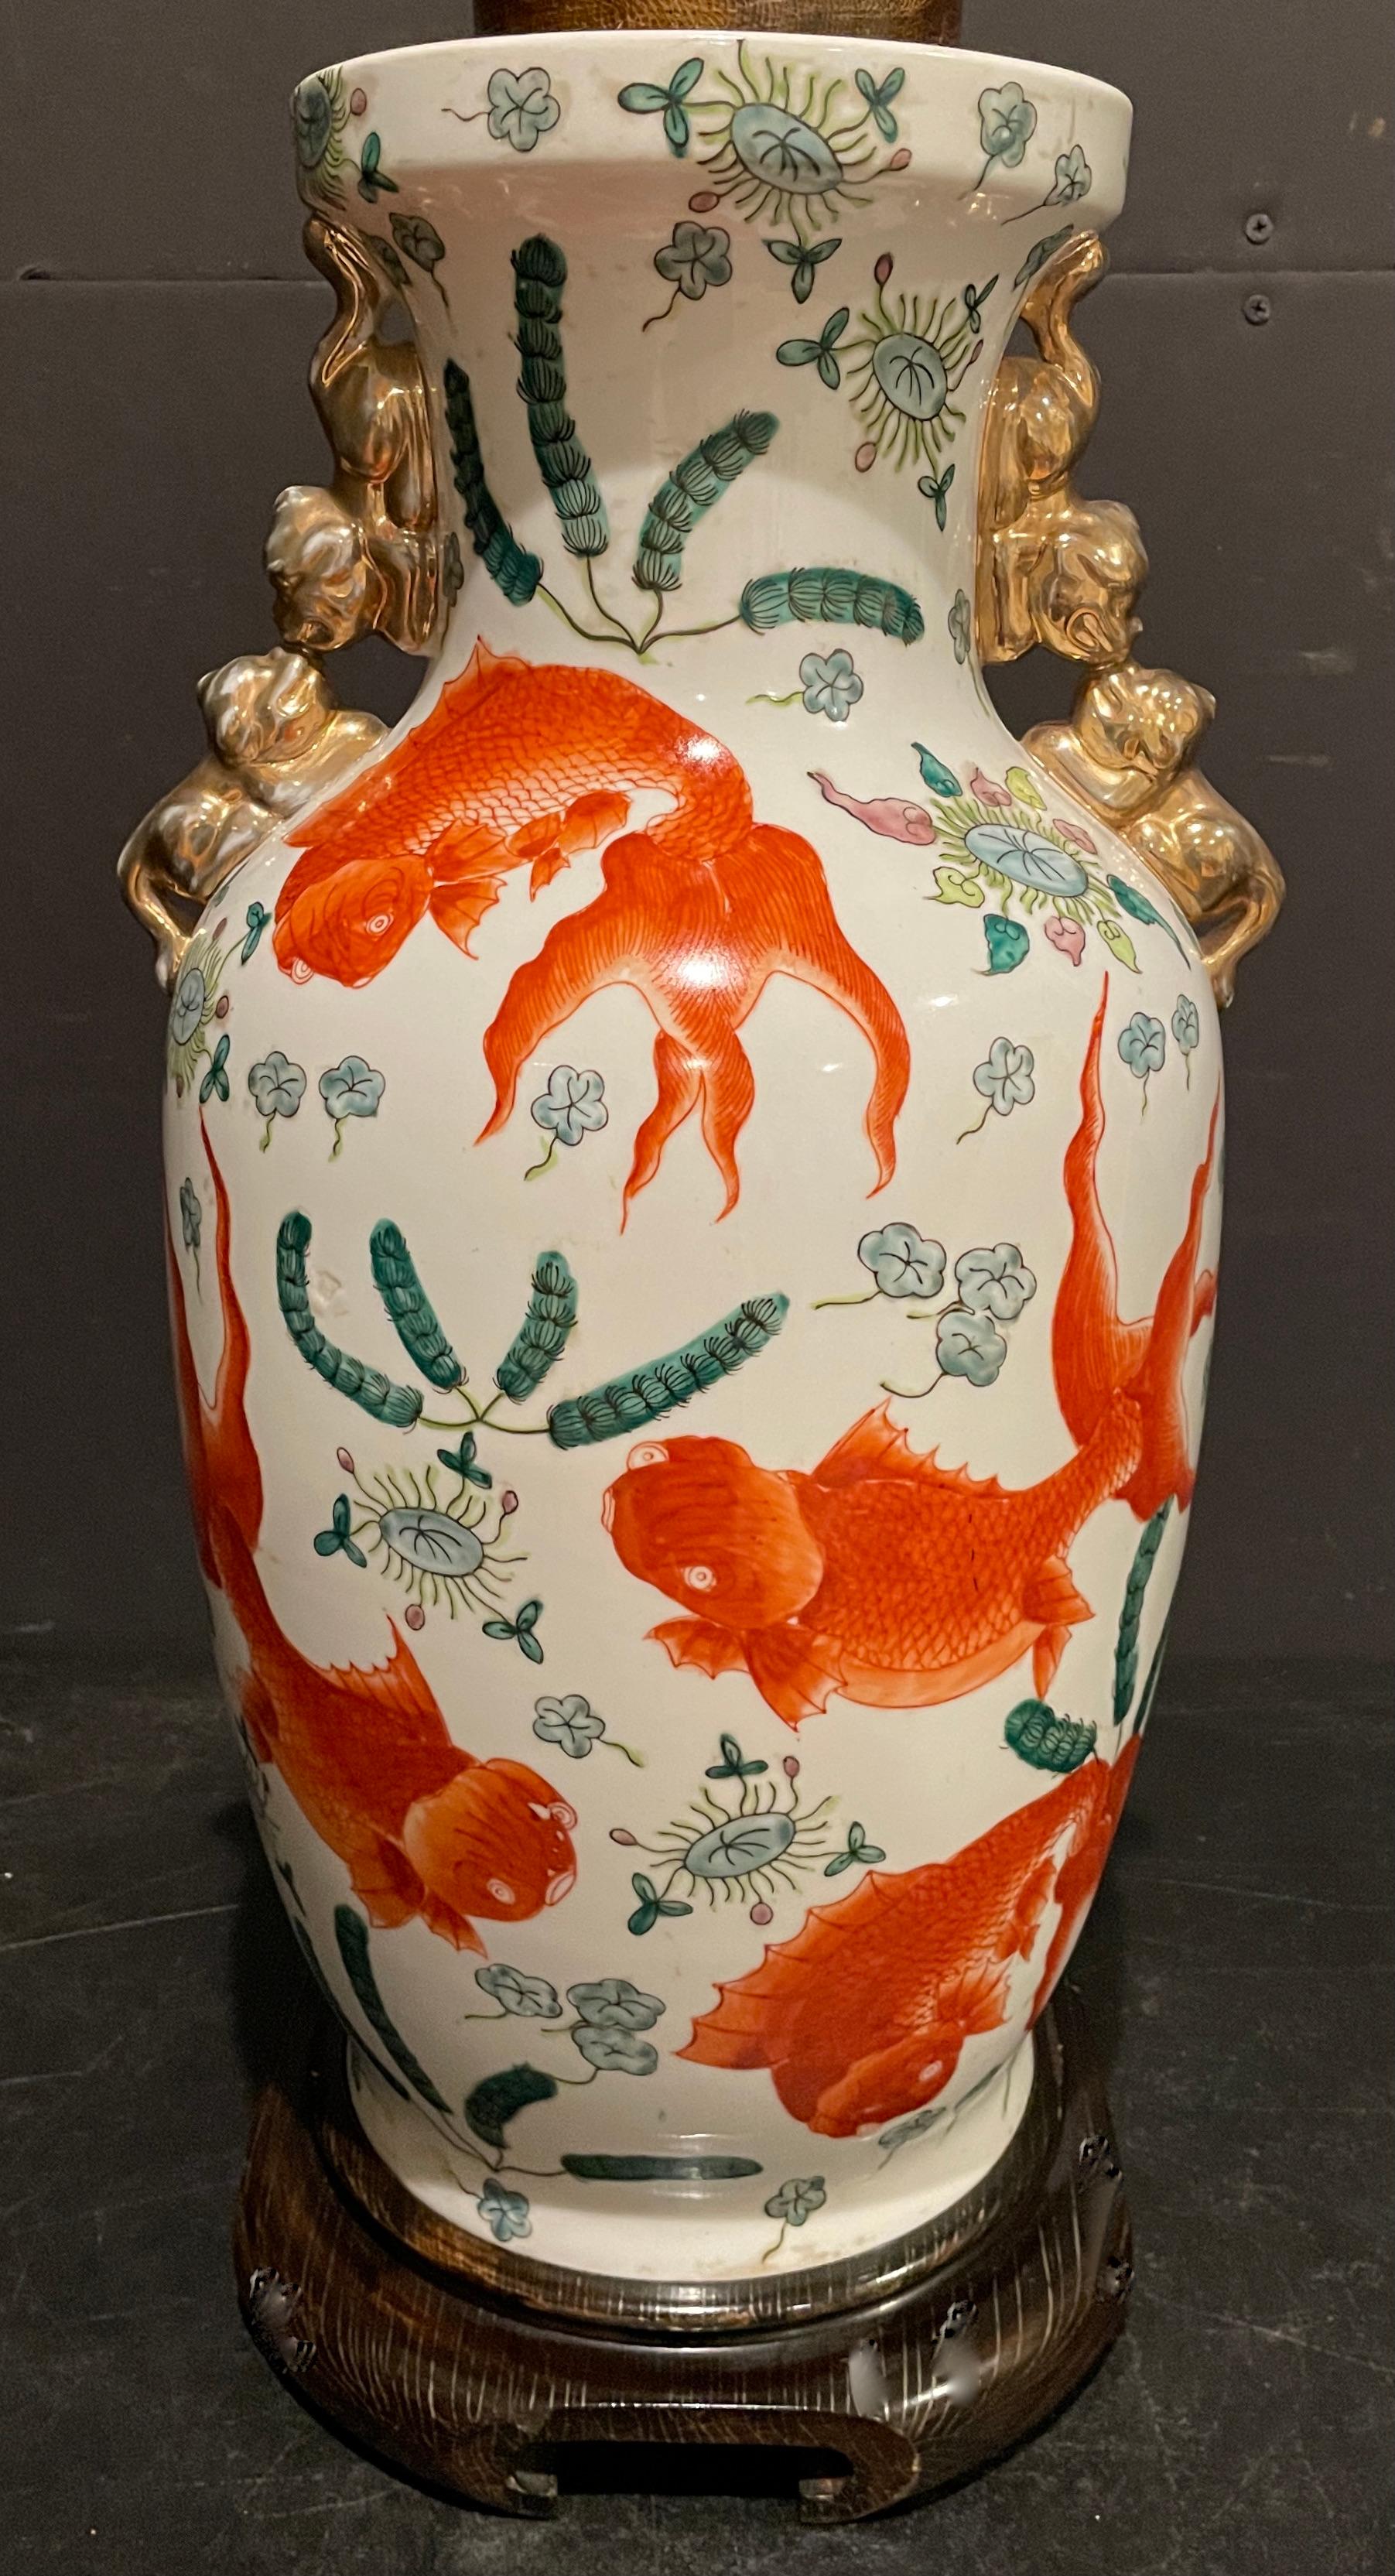 Orange and white vase as lamp, featuring Koi fish amongst seaweed. Applied gilt Foo Dog handles. Colorful famille rose images.
20